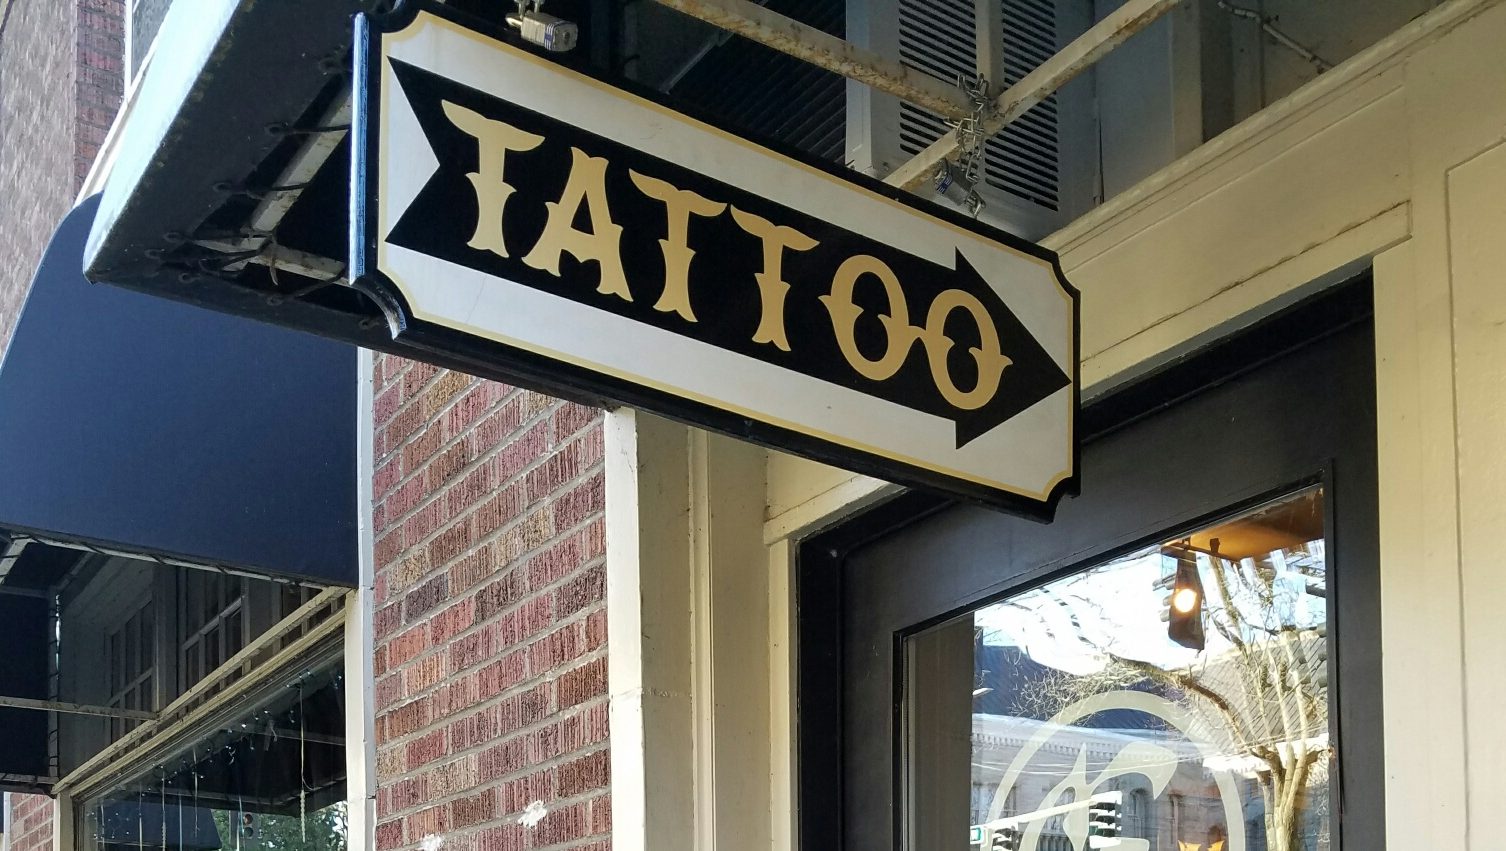 A Woman Wanted a “Cute” Cowboy Tattoo, The Parlor Made a Mistake